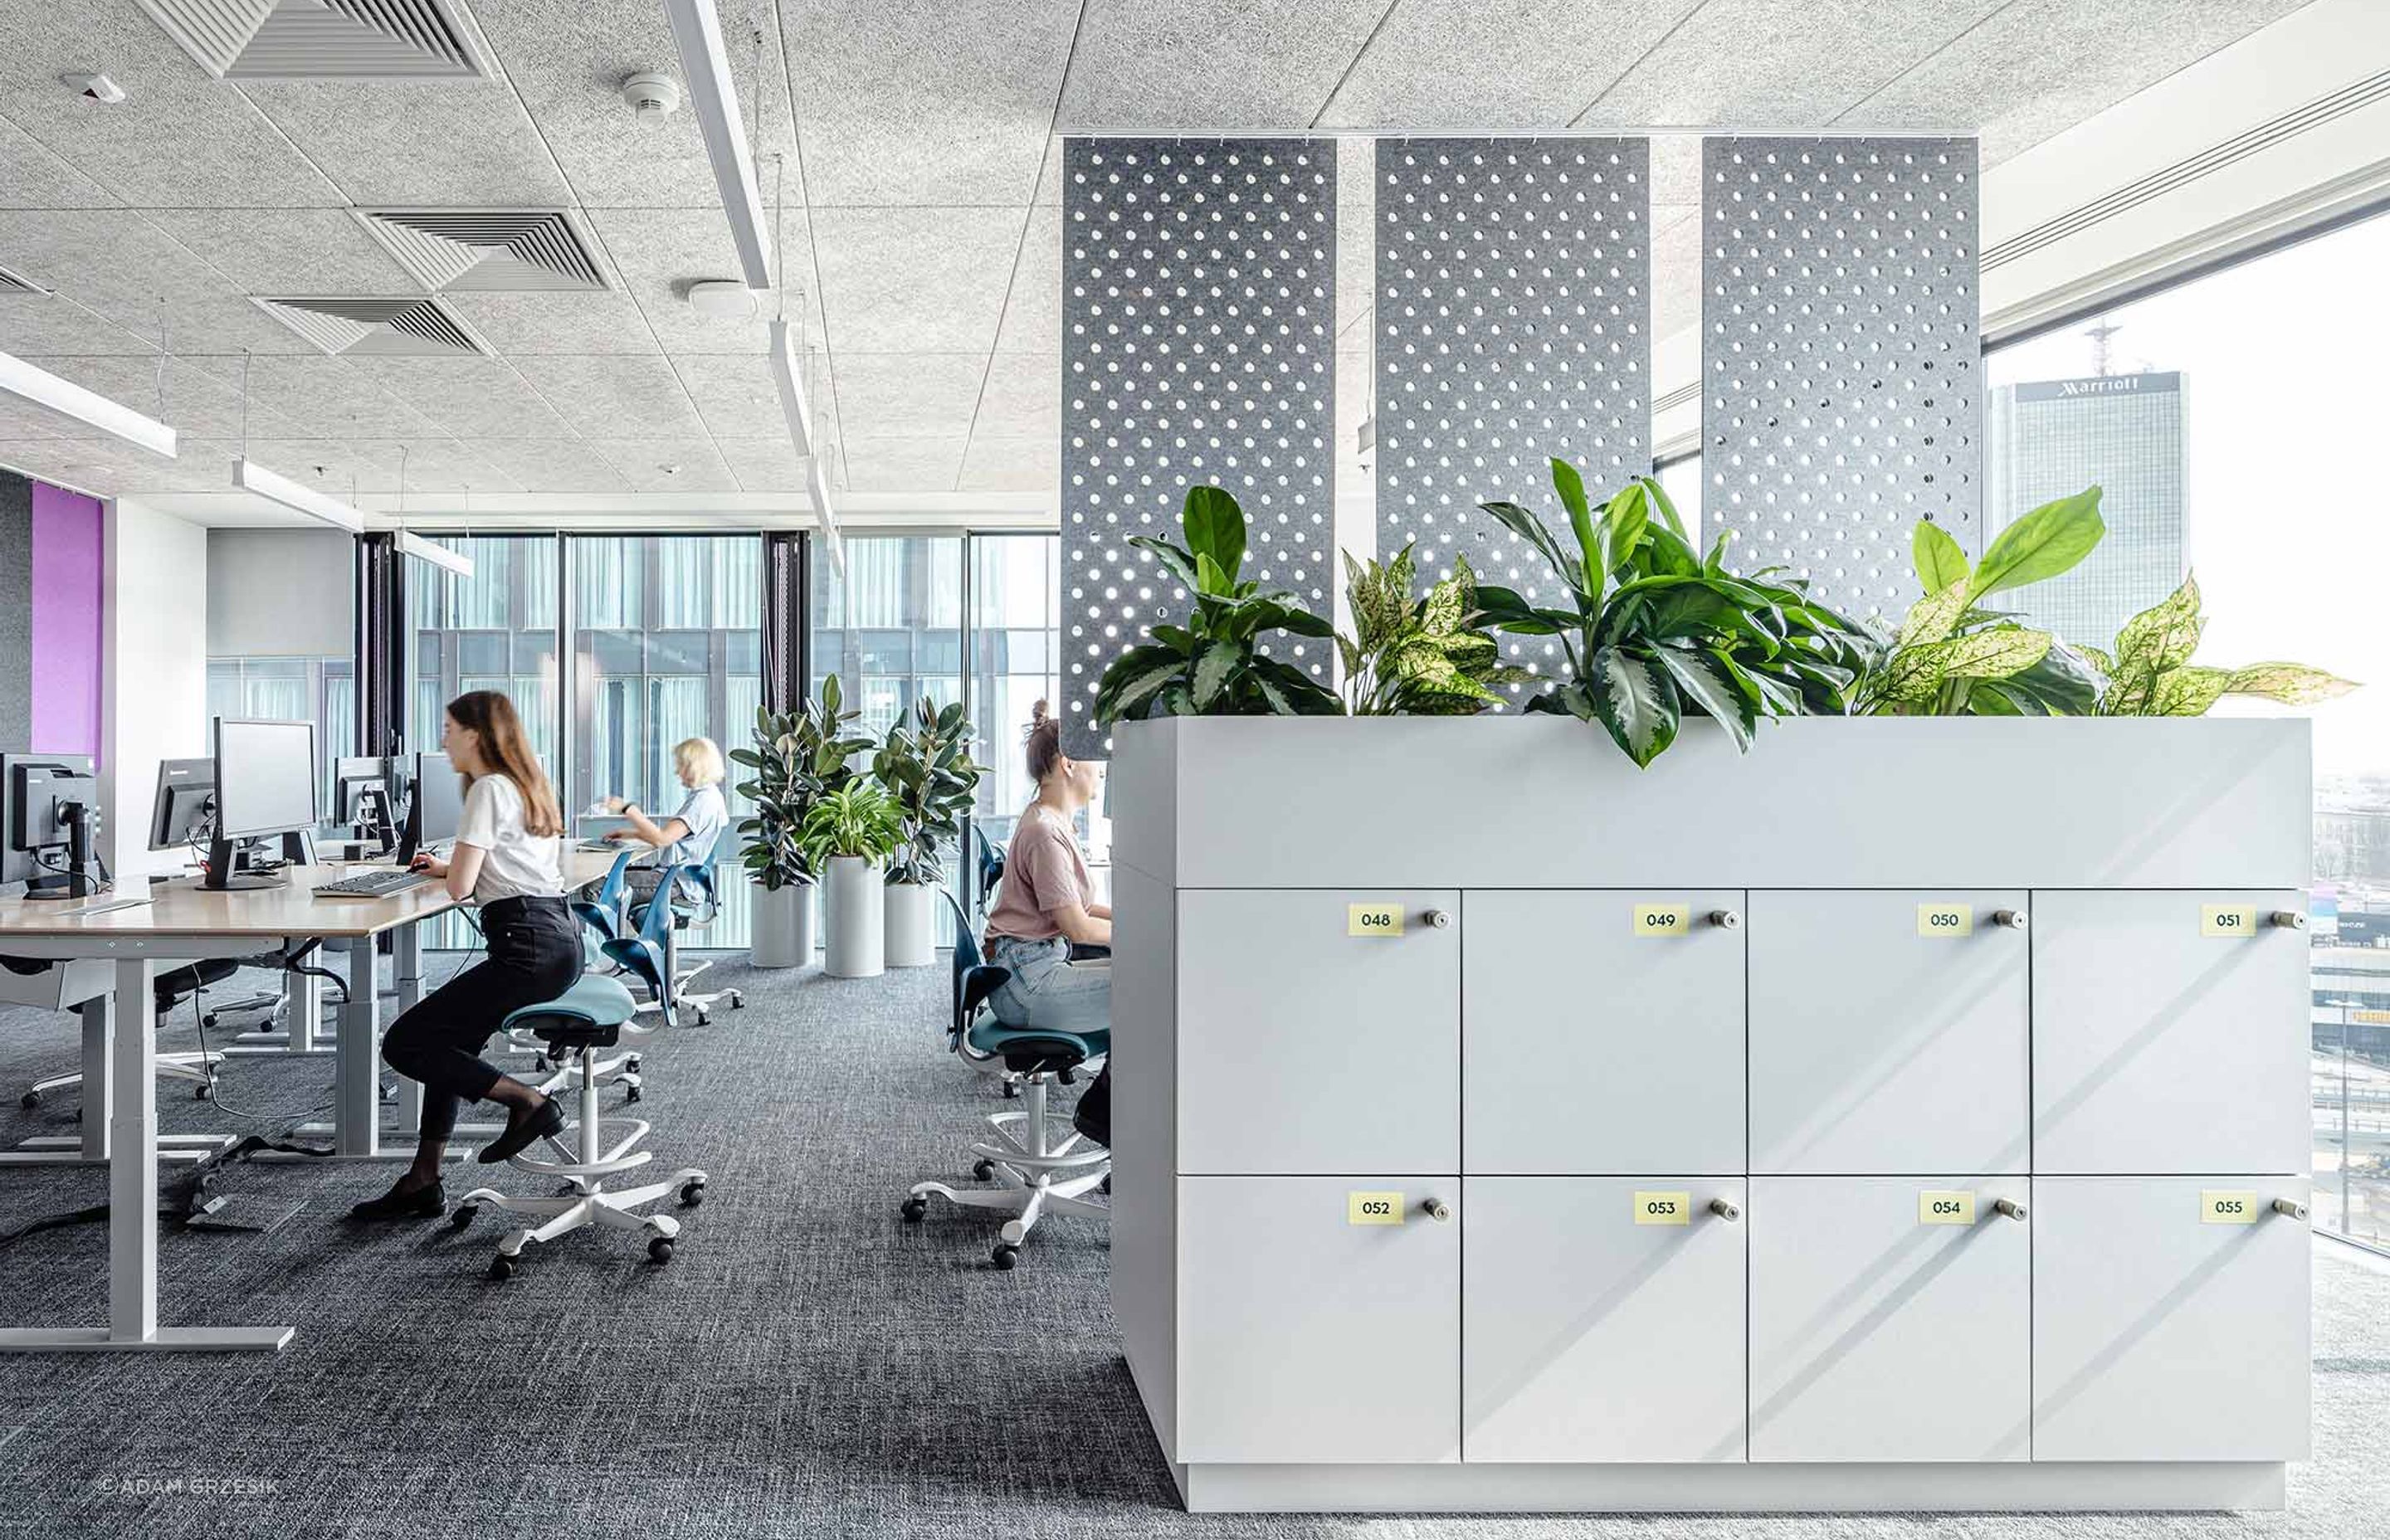 Featured: HÅG Capisco Puls 8020 in Seagreen Plastic, with Select Fabric (67101), added footring, in white | Copyright: Workplace |